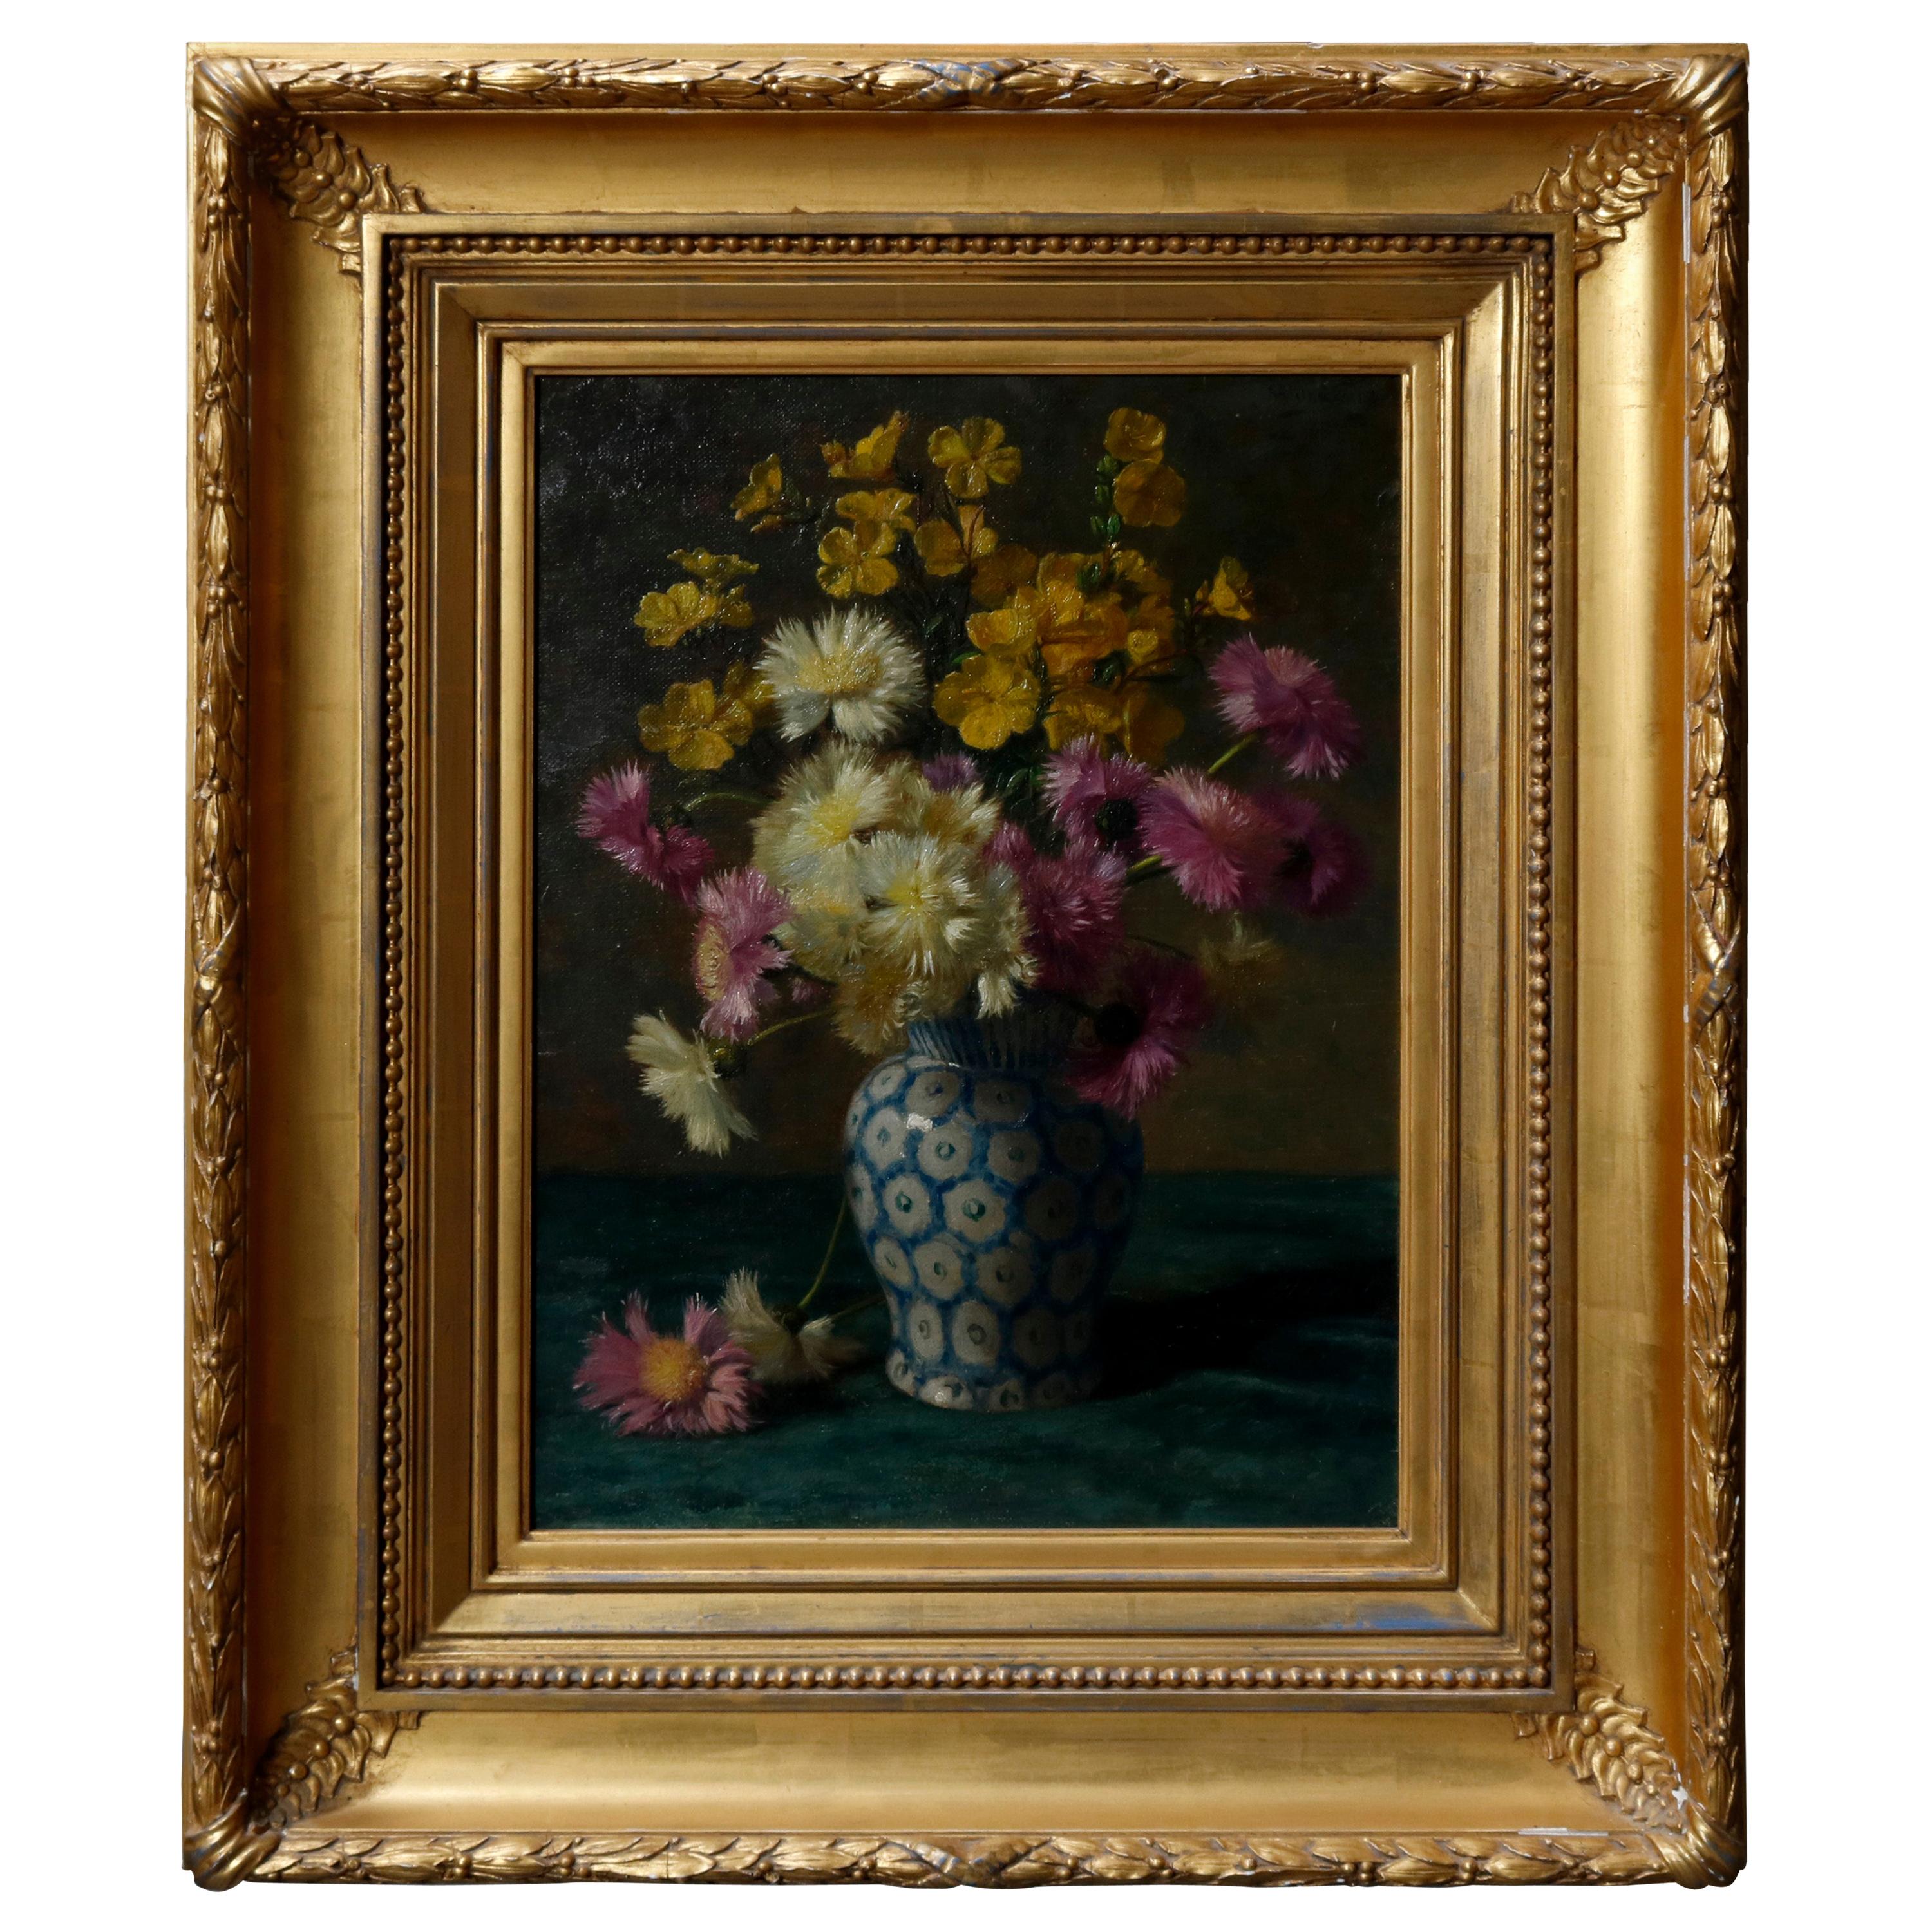 Floral Still Painting of Vase Bouquet on Table in Giltwood Frame, circa 1900